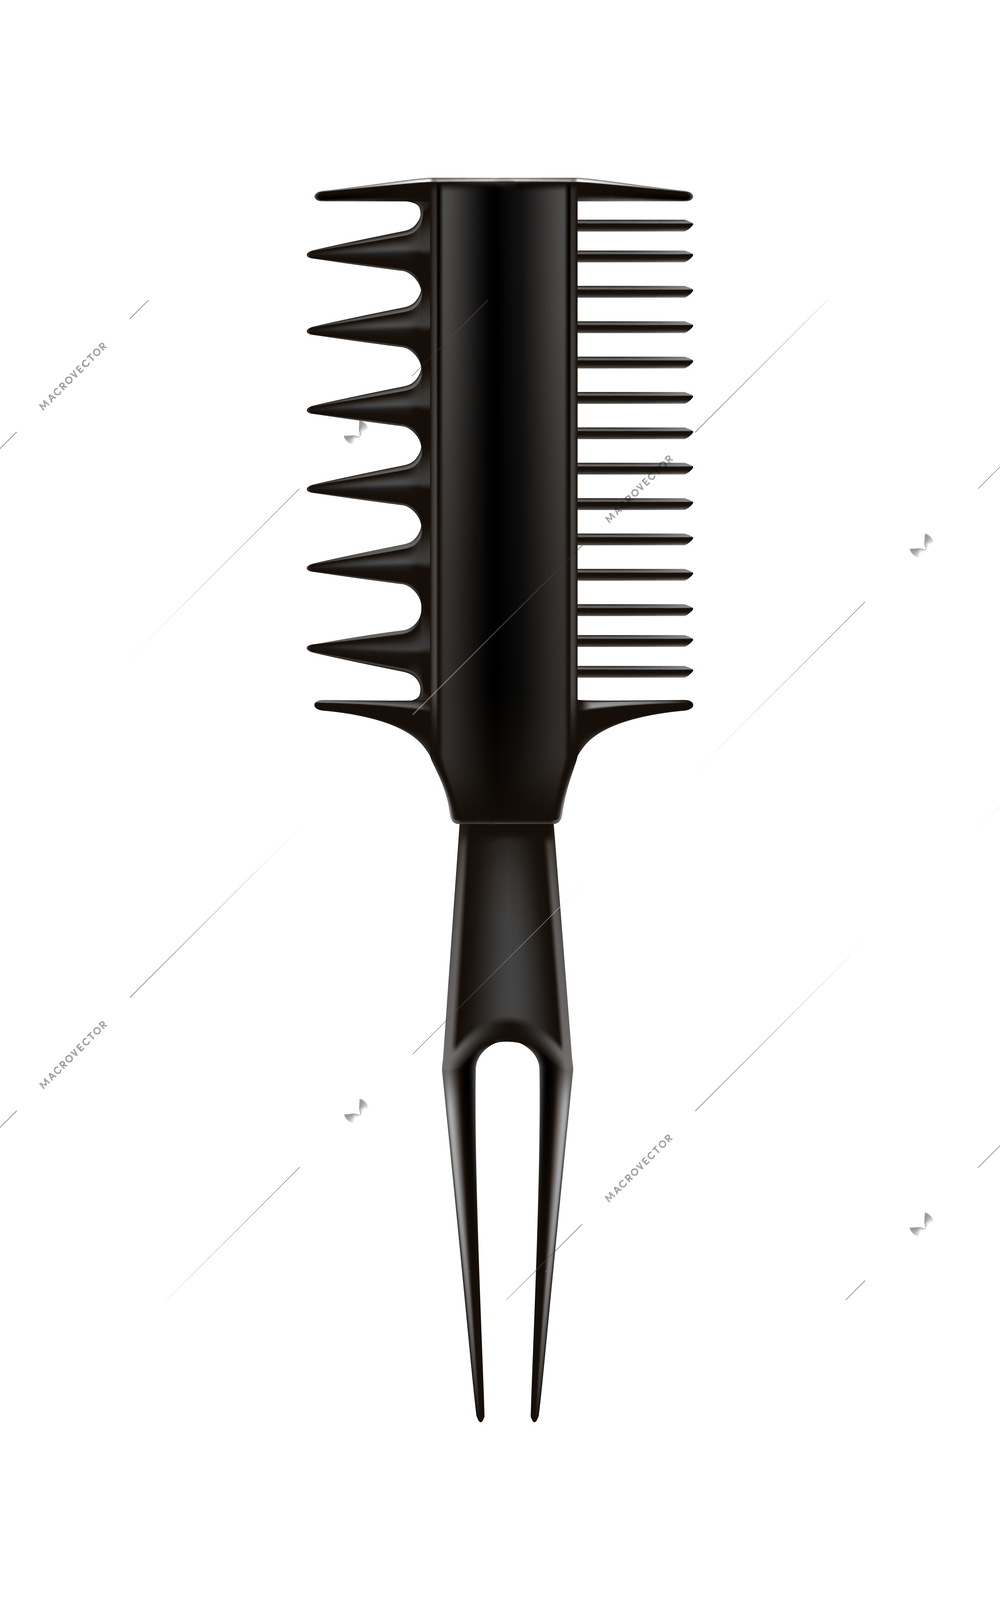 Hairdress tools realisic composition with isolated piece of barbers equipment on blank background vector illustration